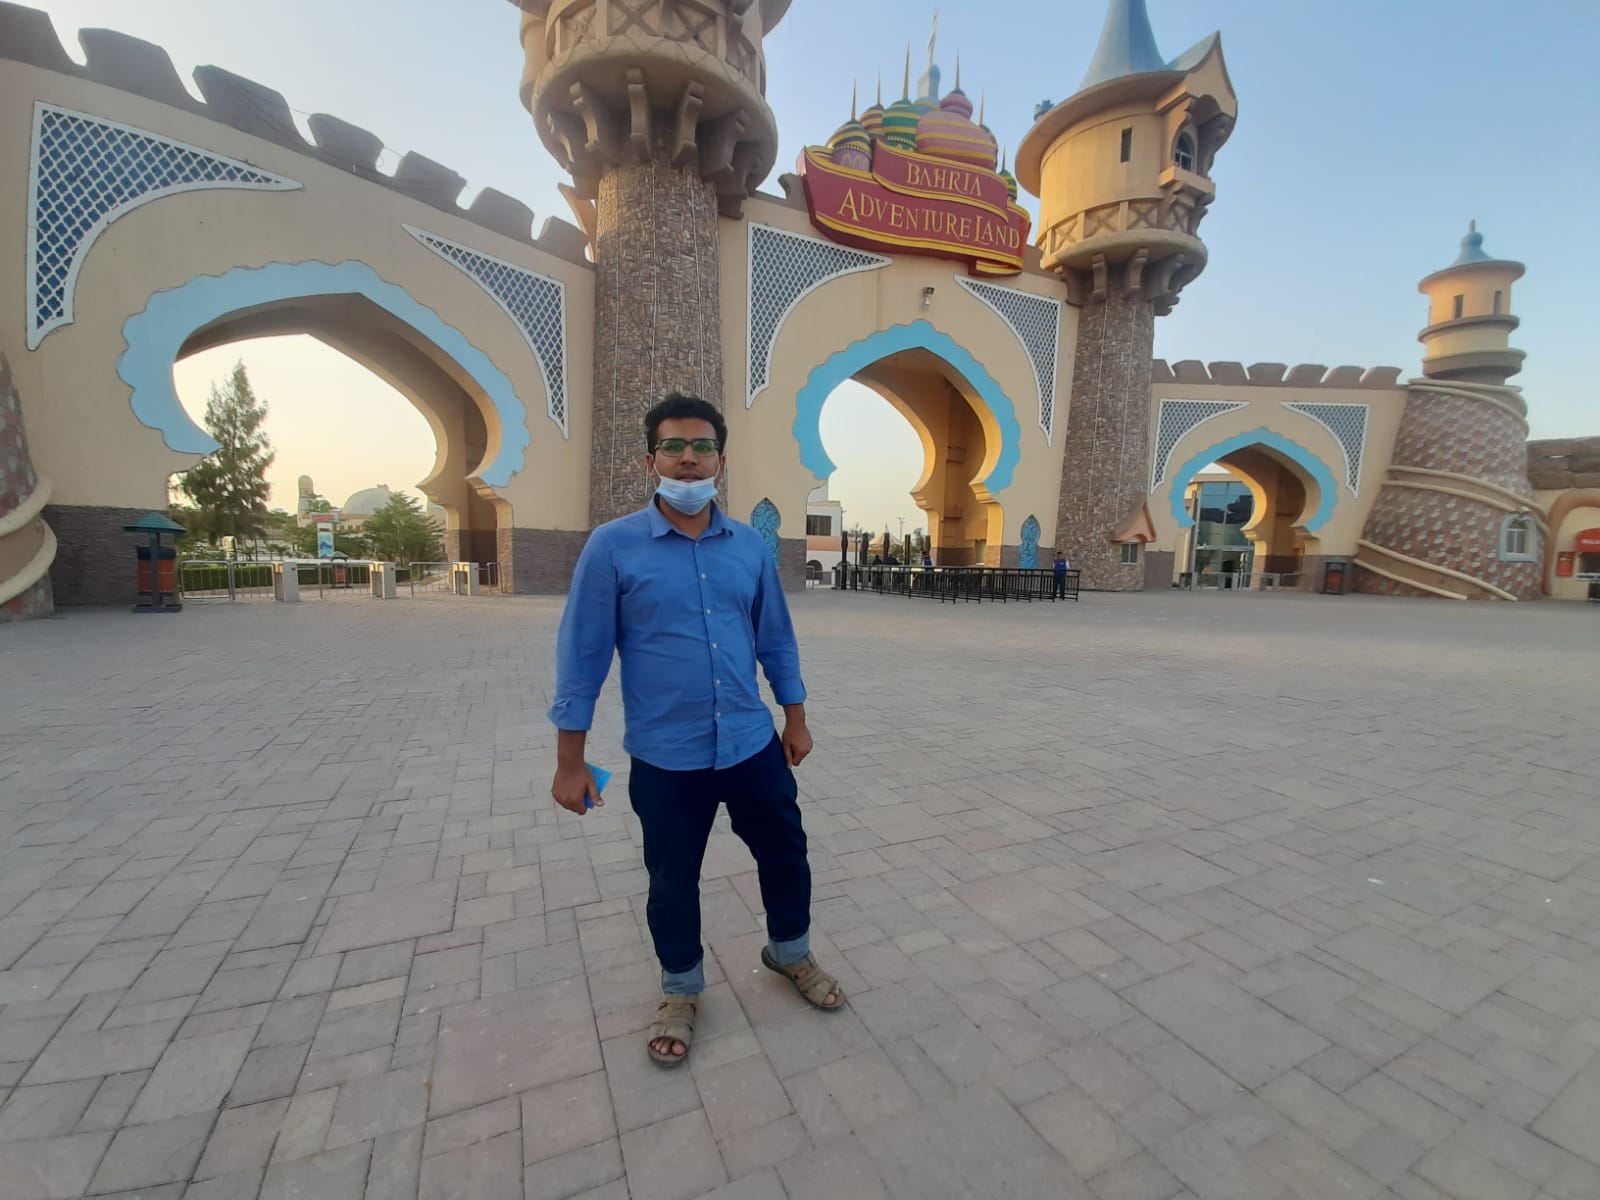 Again Photo Taken In Front of Bahria Adventure Land